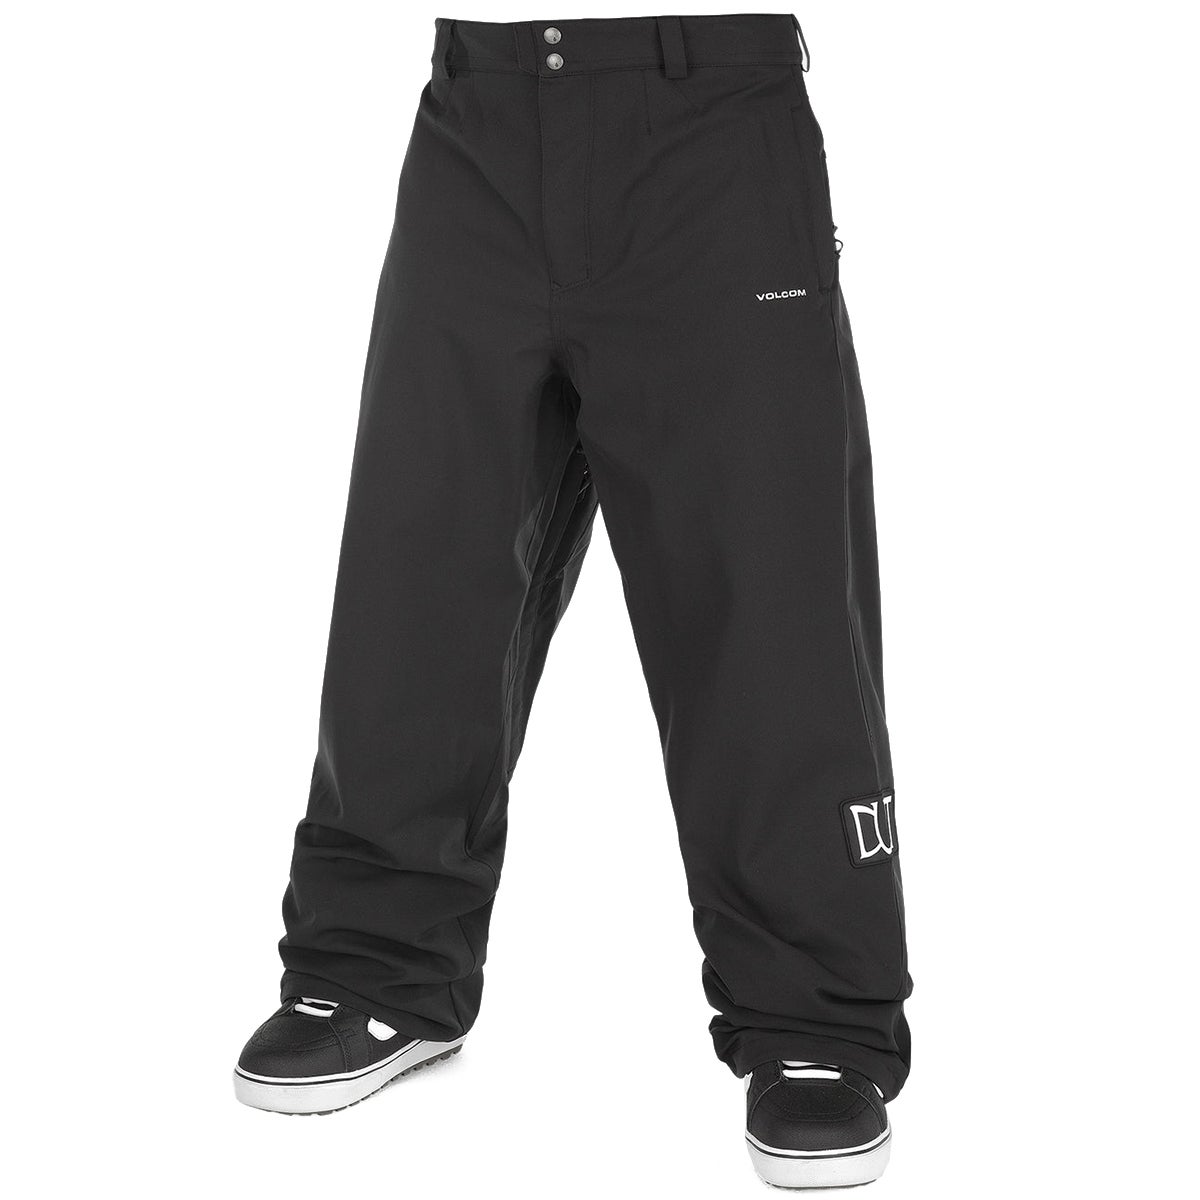 Volcom X Dustbox VLCM Pant in Black | Boardertown